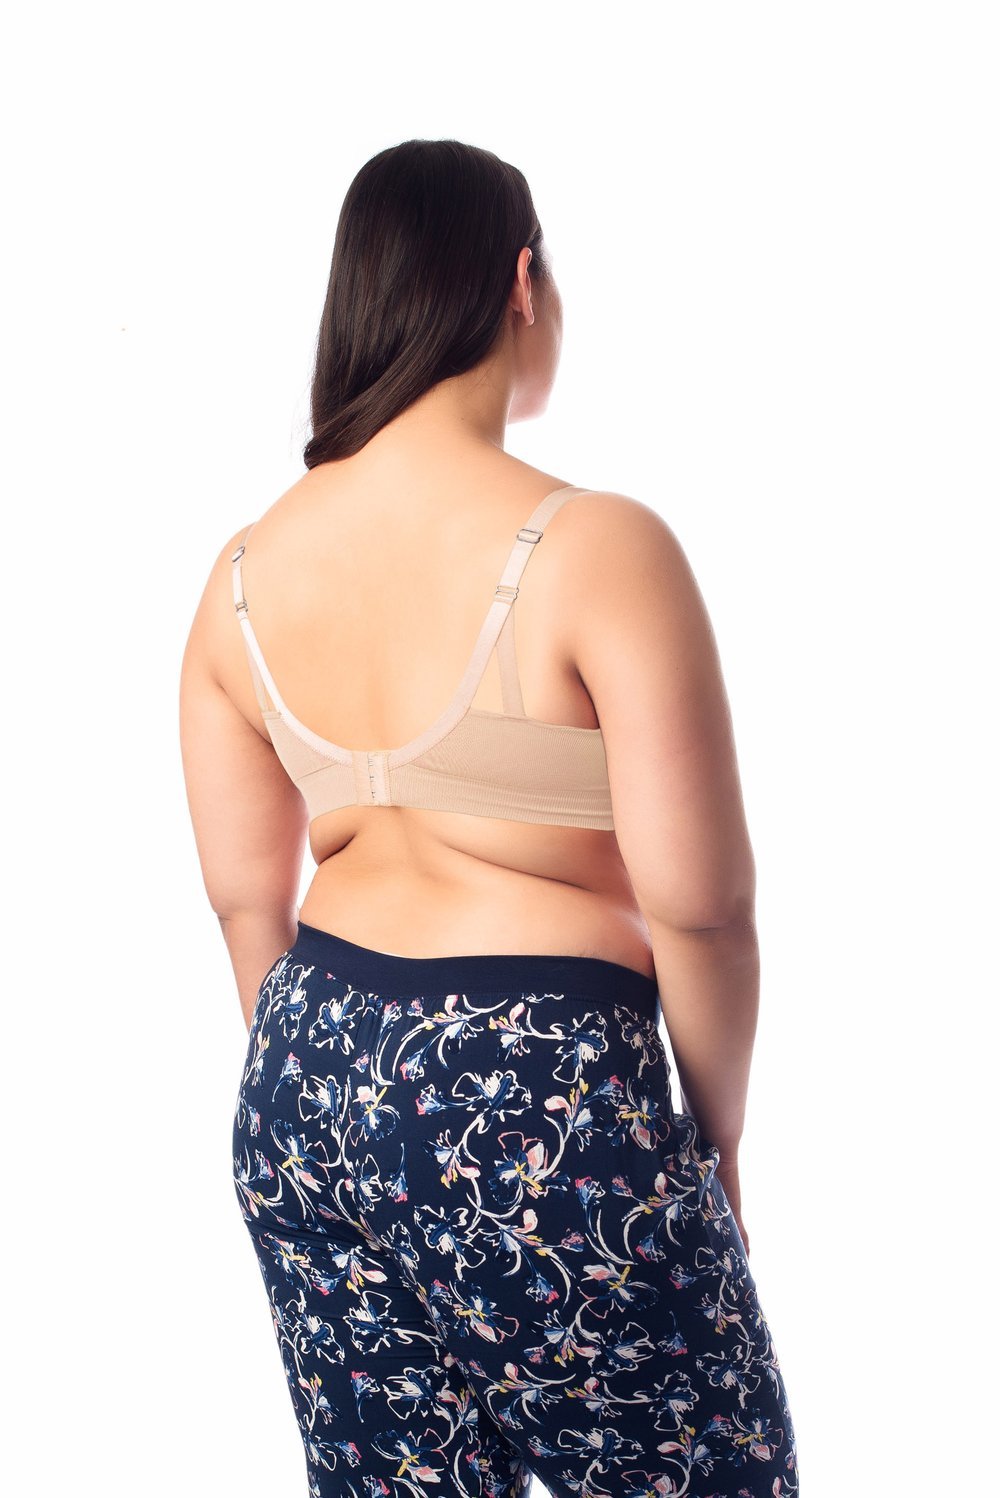 Hot Milk My Necessity - Full Cup - Maternity Wirefree Bra  Available at Illusions Lingerie